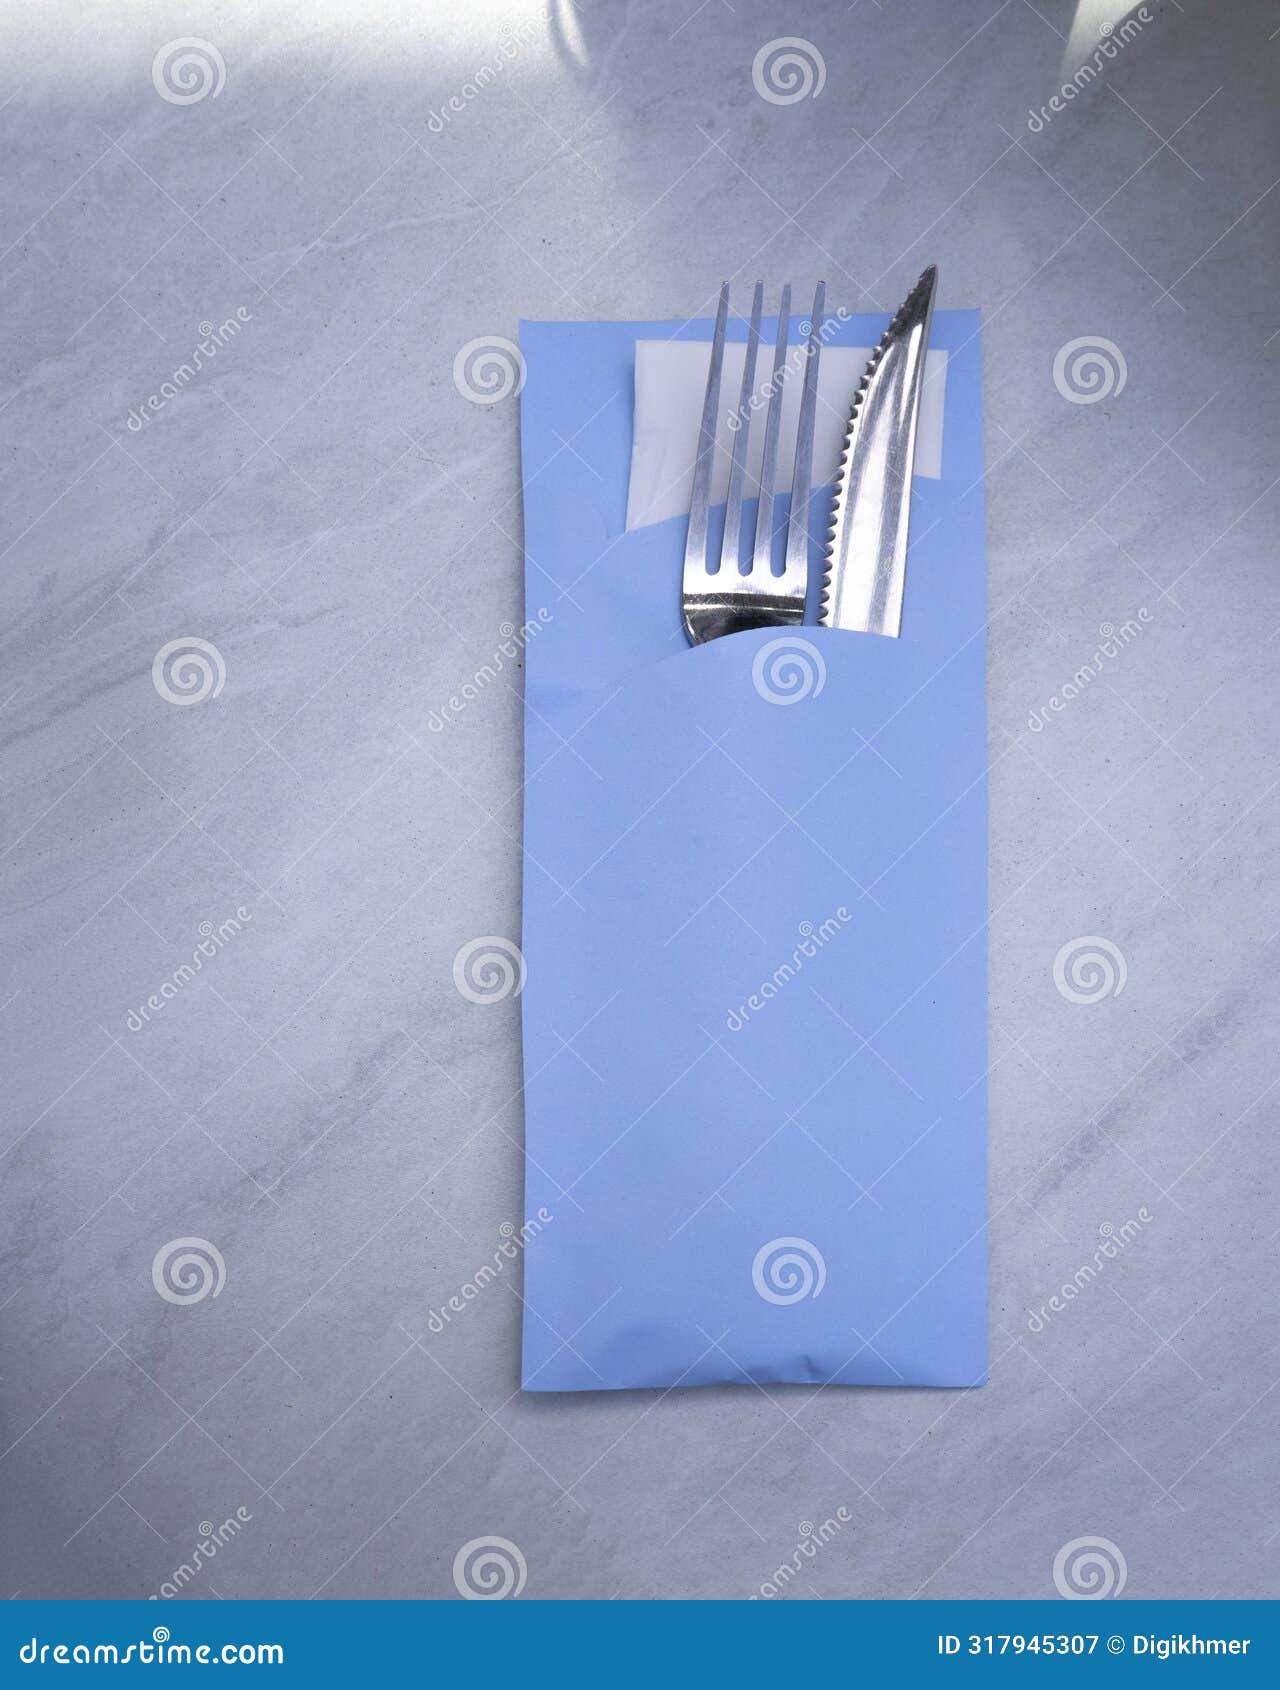 cutlery set with fork, knife, and tissue wrapped inside a blue paper envelope